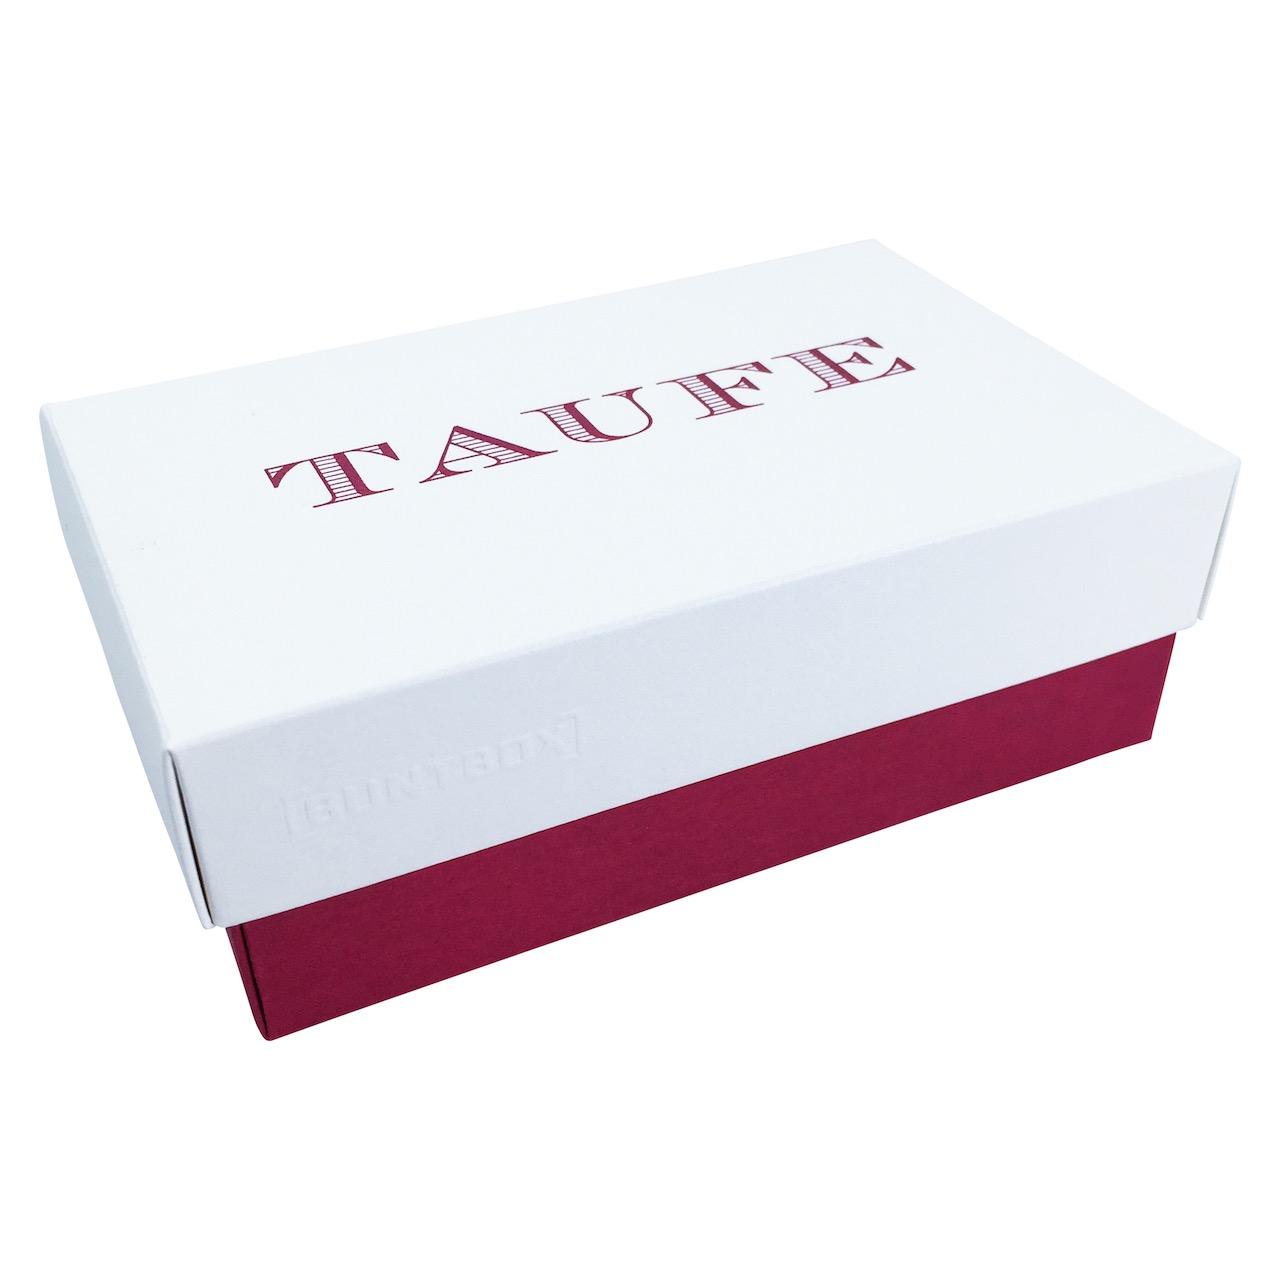 Buntbox S Fine Paper Taufe in Champagner-Bordeaux